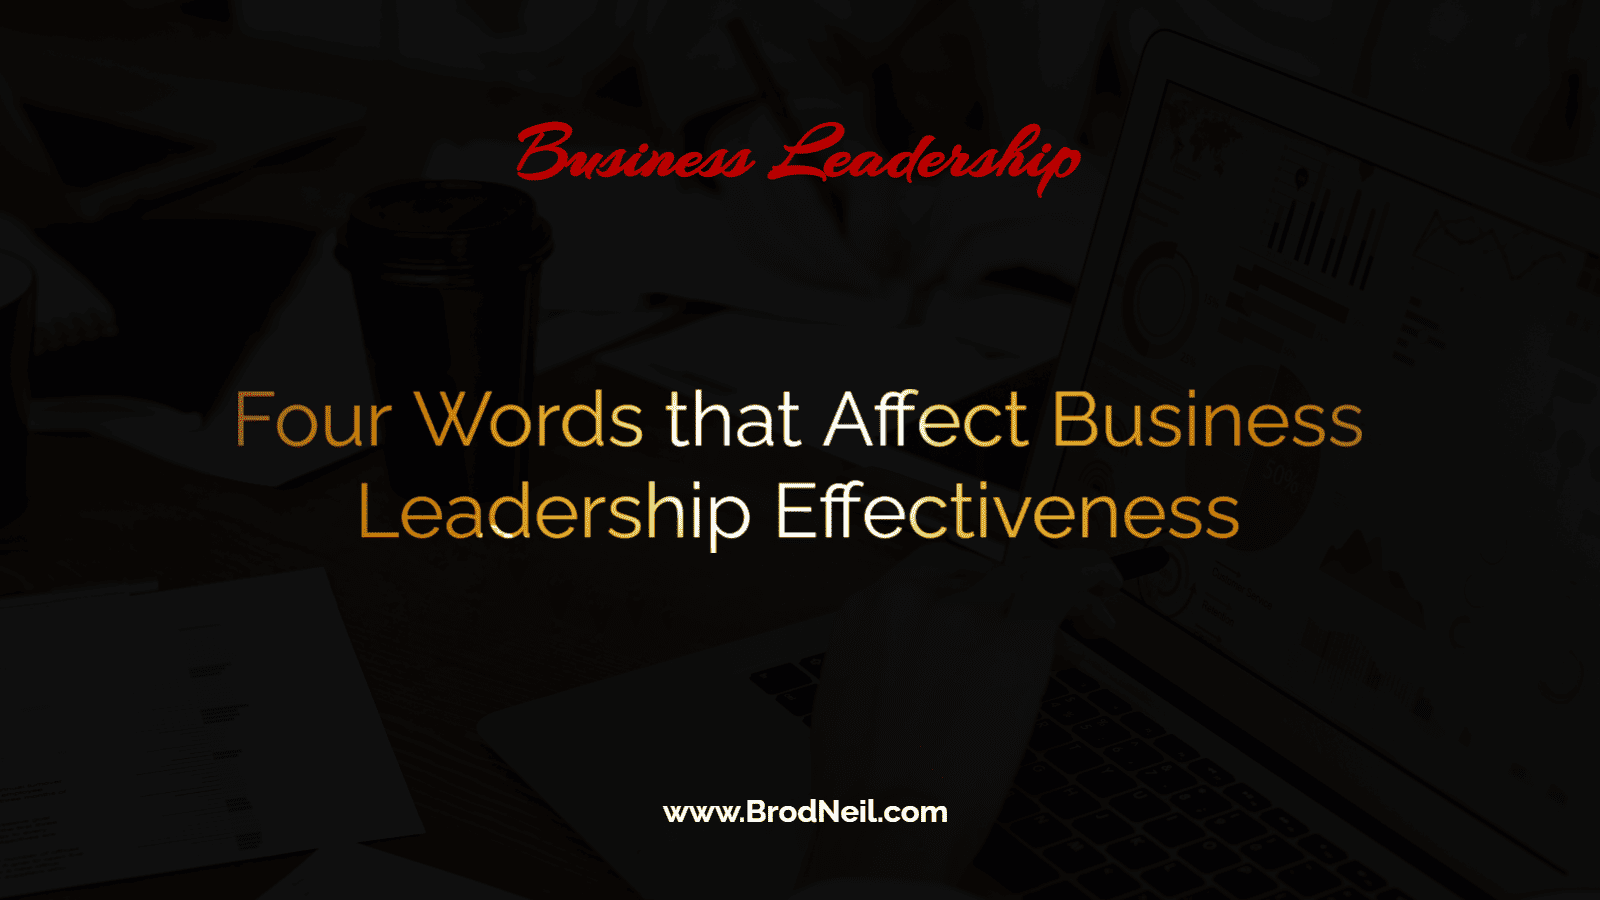 Four words that affect business leadership effectiveness